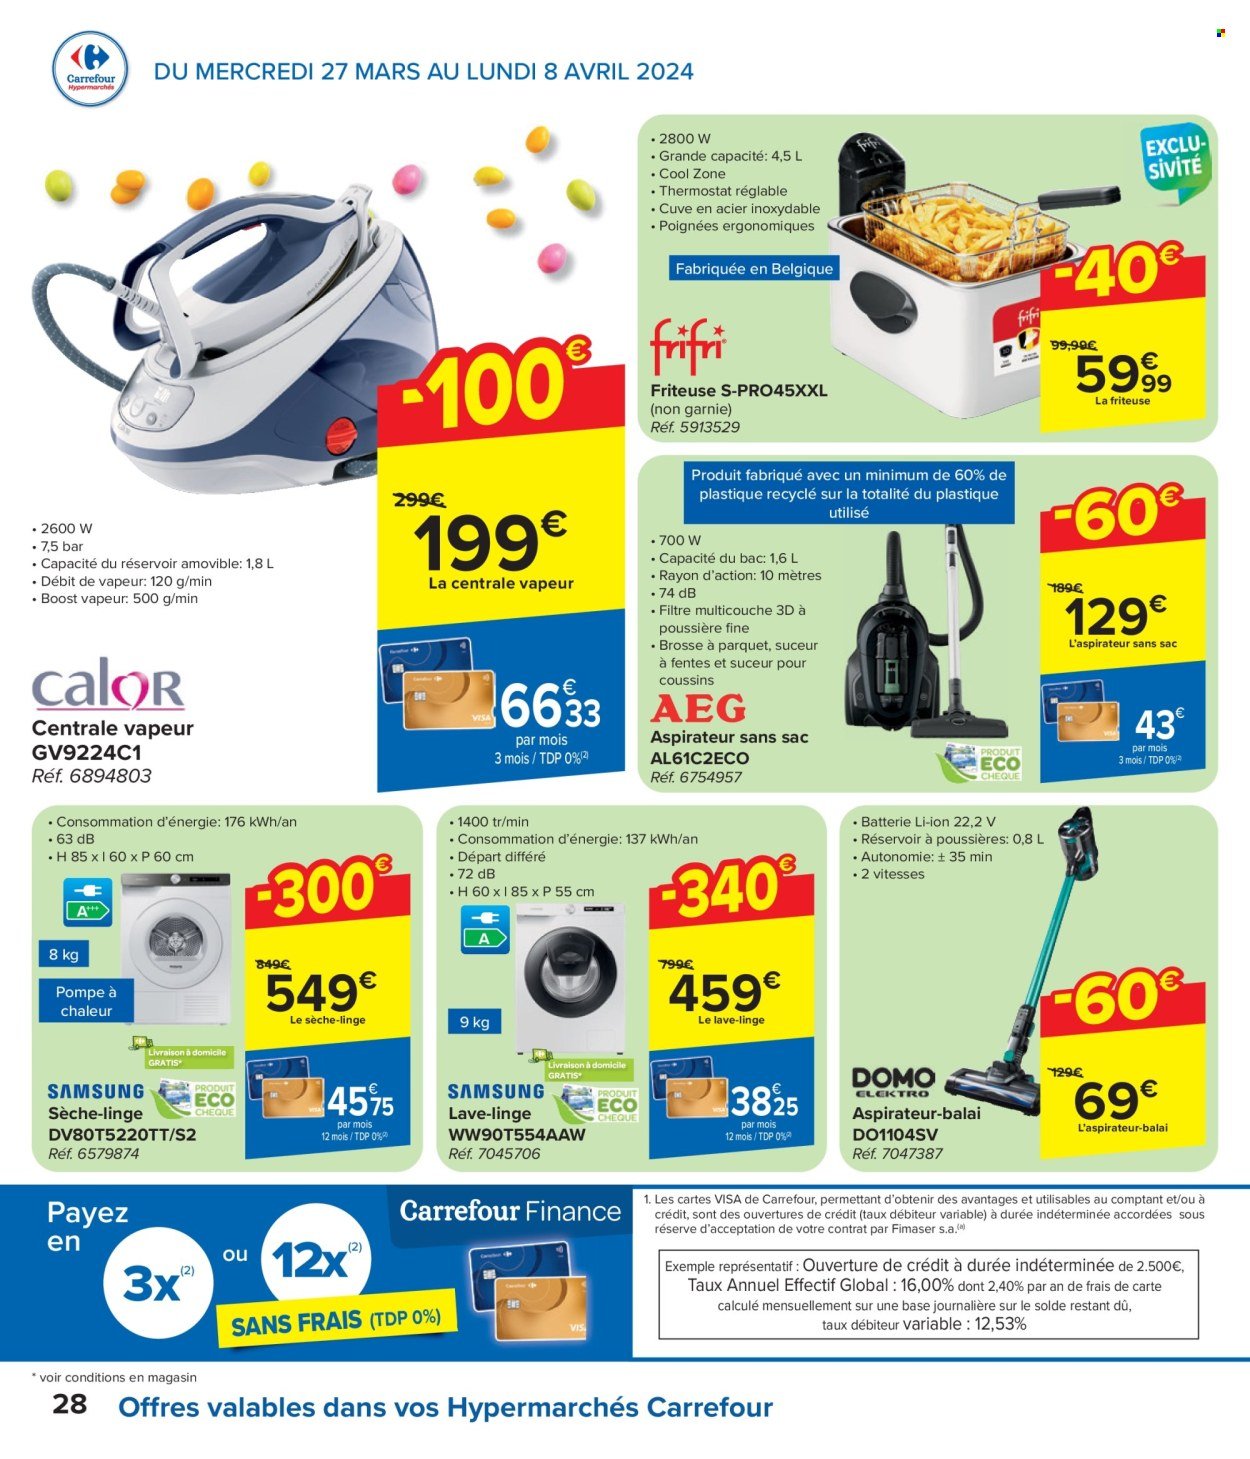 Catalogue Carrefour hypermarkt - 27.3.2024 - 8.4.2024. Page 28.